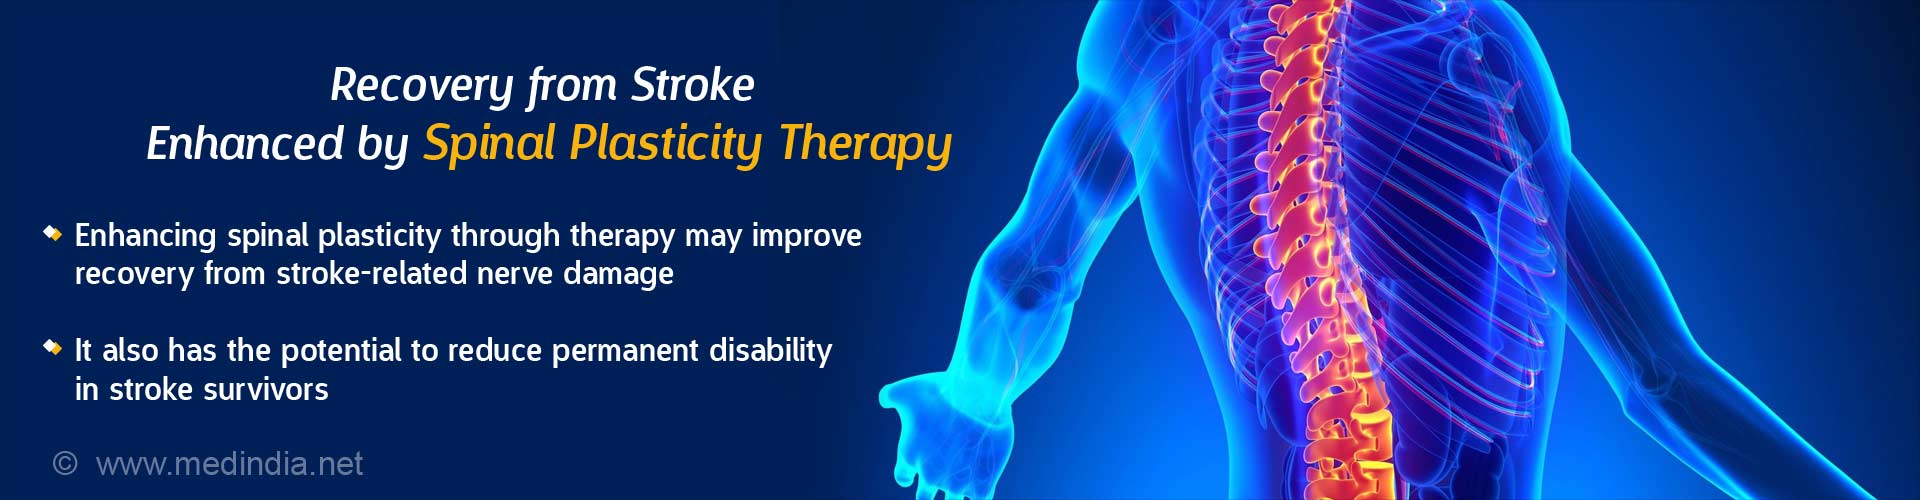 Recovery from stroke enhanced by spinal plasticity therapy
- enhancing spinal plasticity through therapy may improve recovery from stroke-related nerve damage
- it also has the potential to reduce permanent disability in stroke survivors